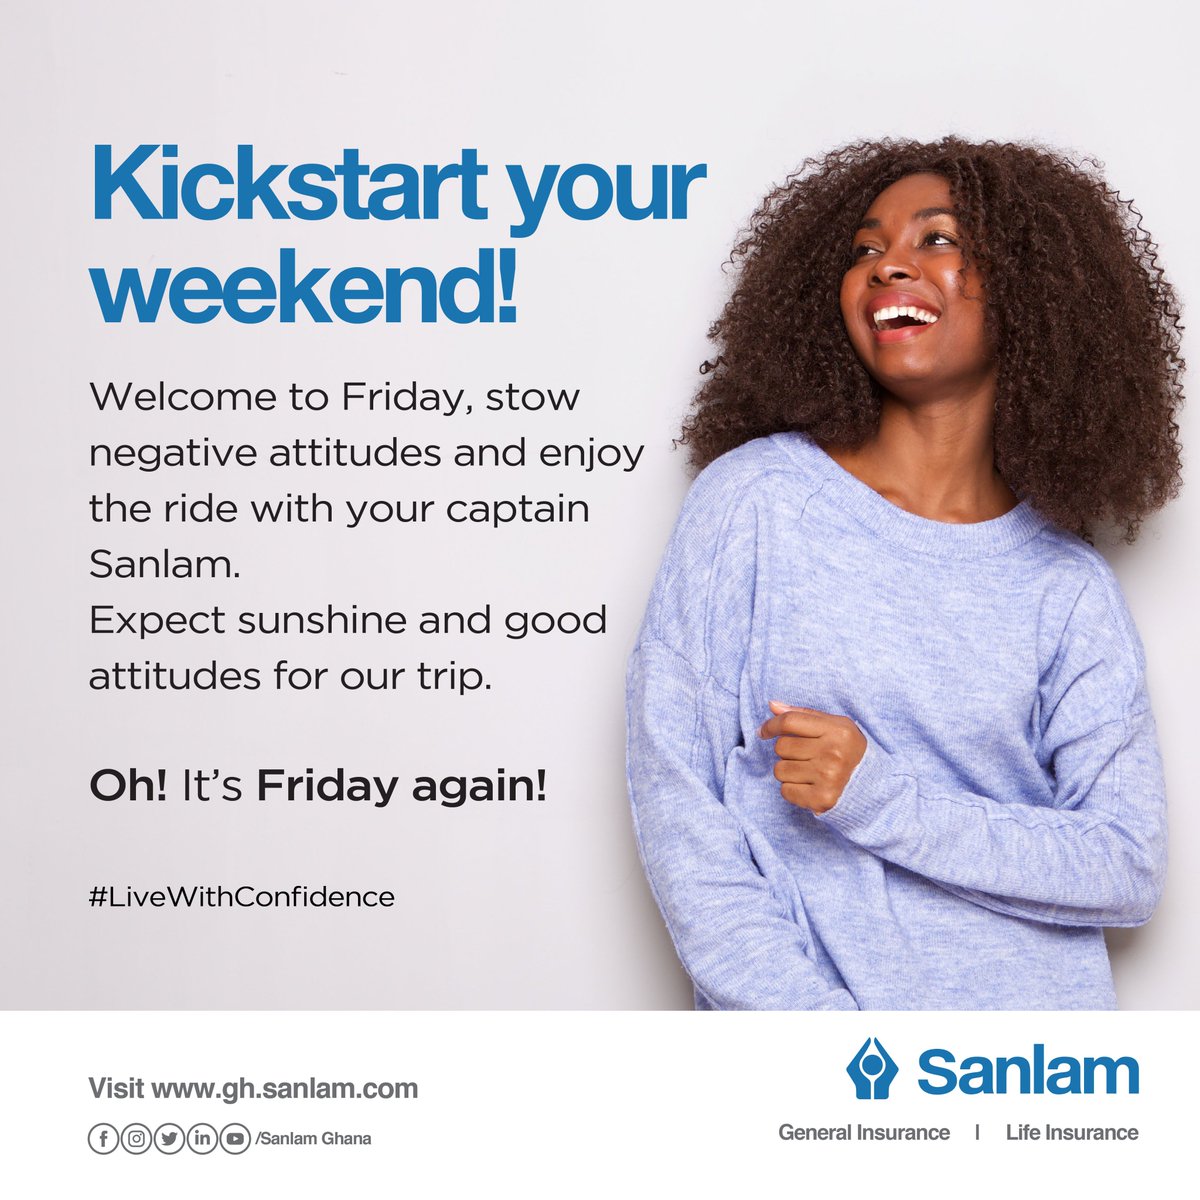 @SanlamGhana It's essential to live every day, as it could be your last.

#SanlamGhana
#LiveWithConfidence
#Insurance
#It’sFriday